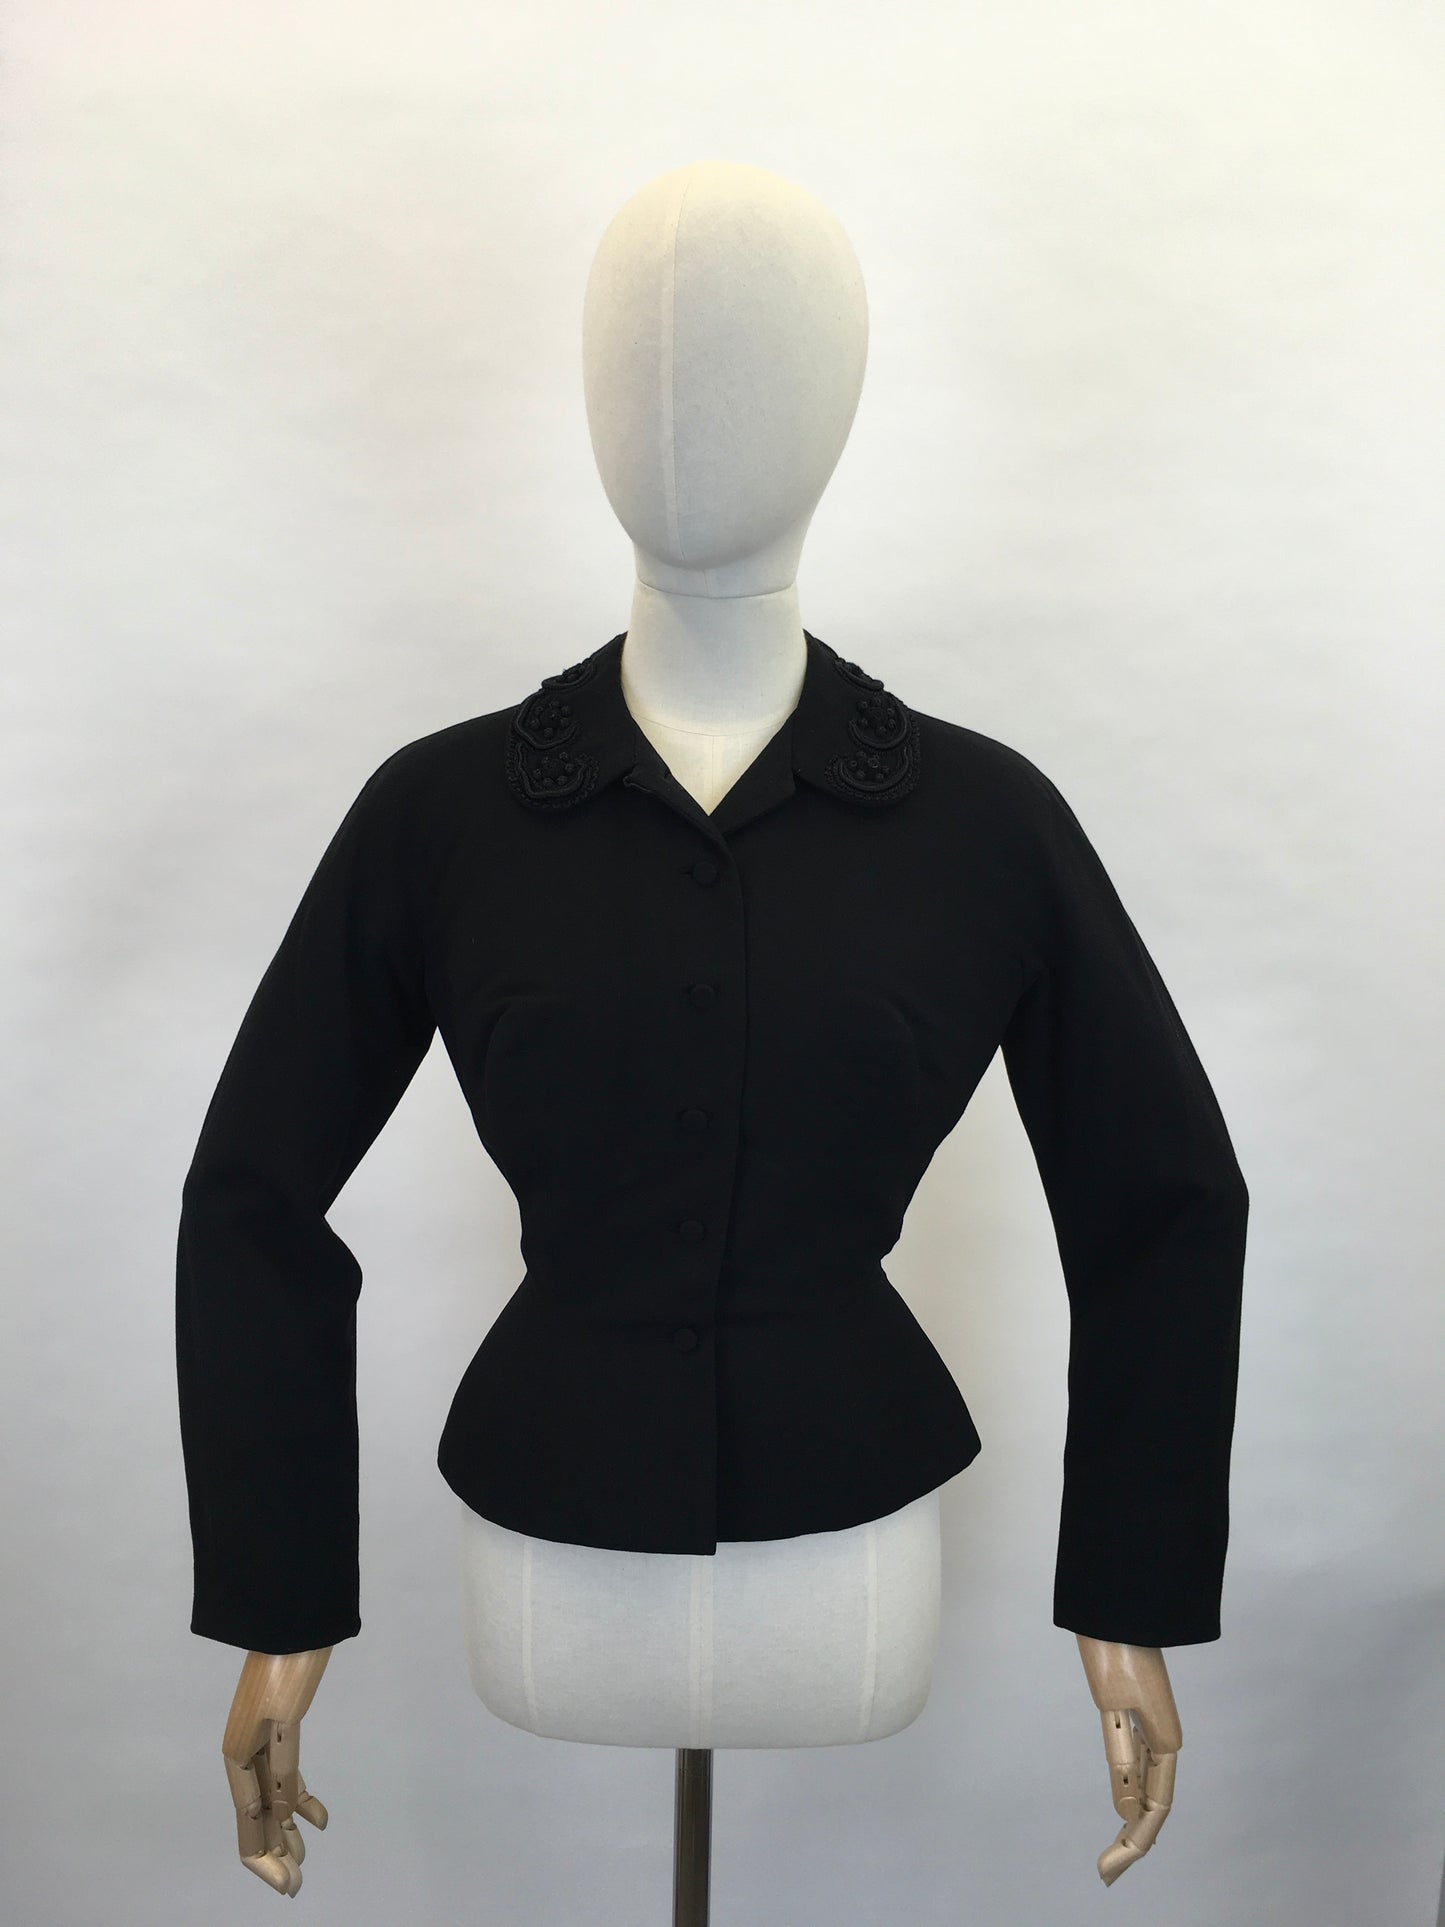 Original Late 1940’s early 1950’s ‘ Hattie Carnegie’ Black Jacket - Creating the Iconic New Look Silhouette